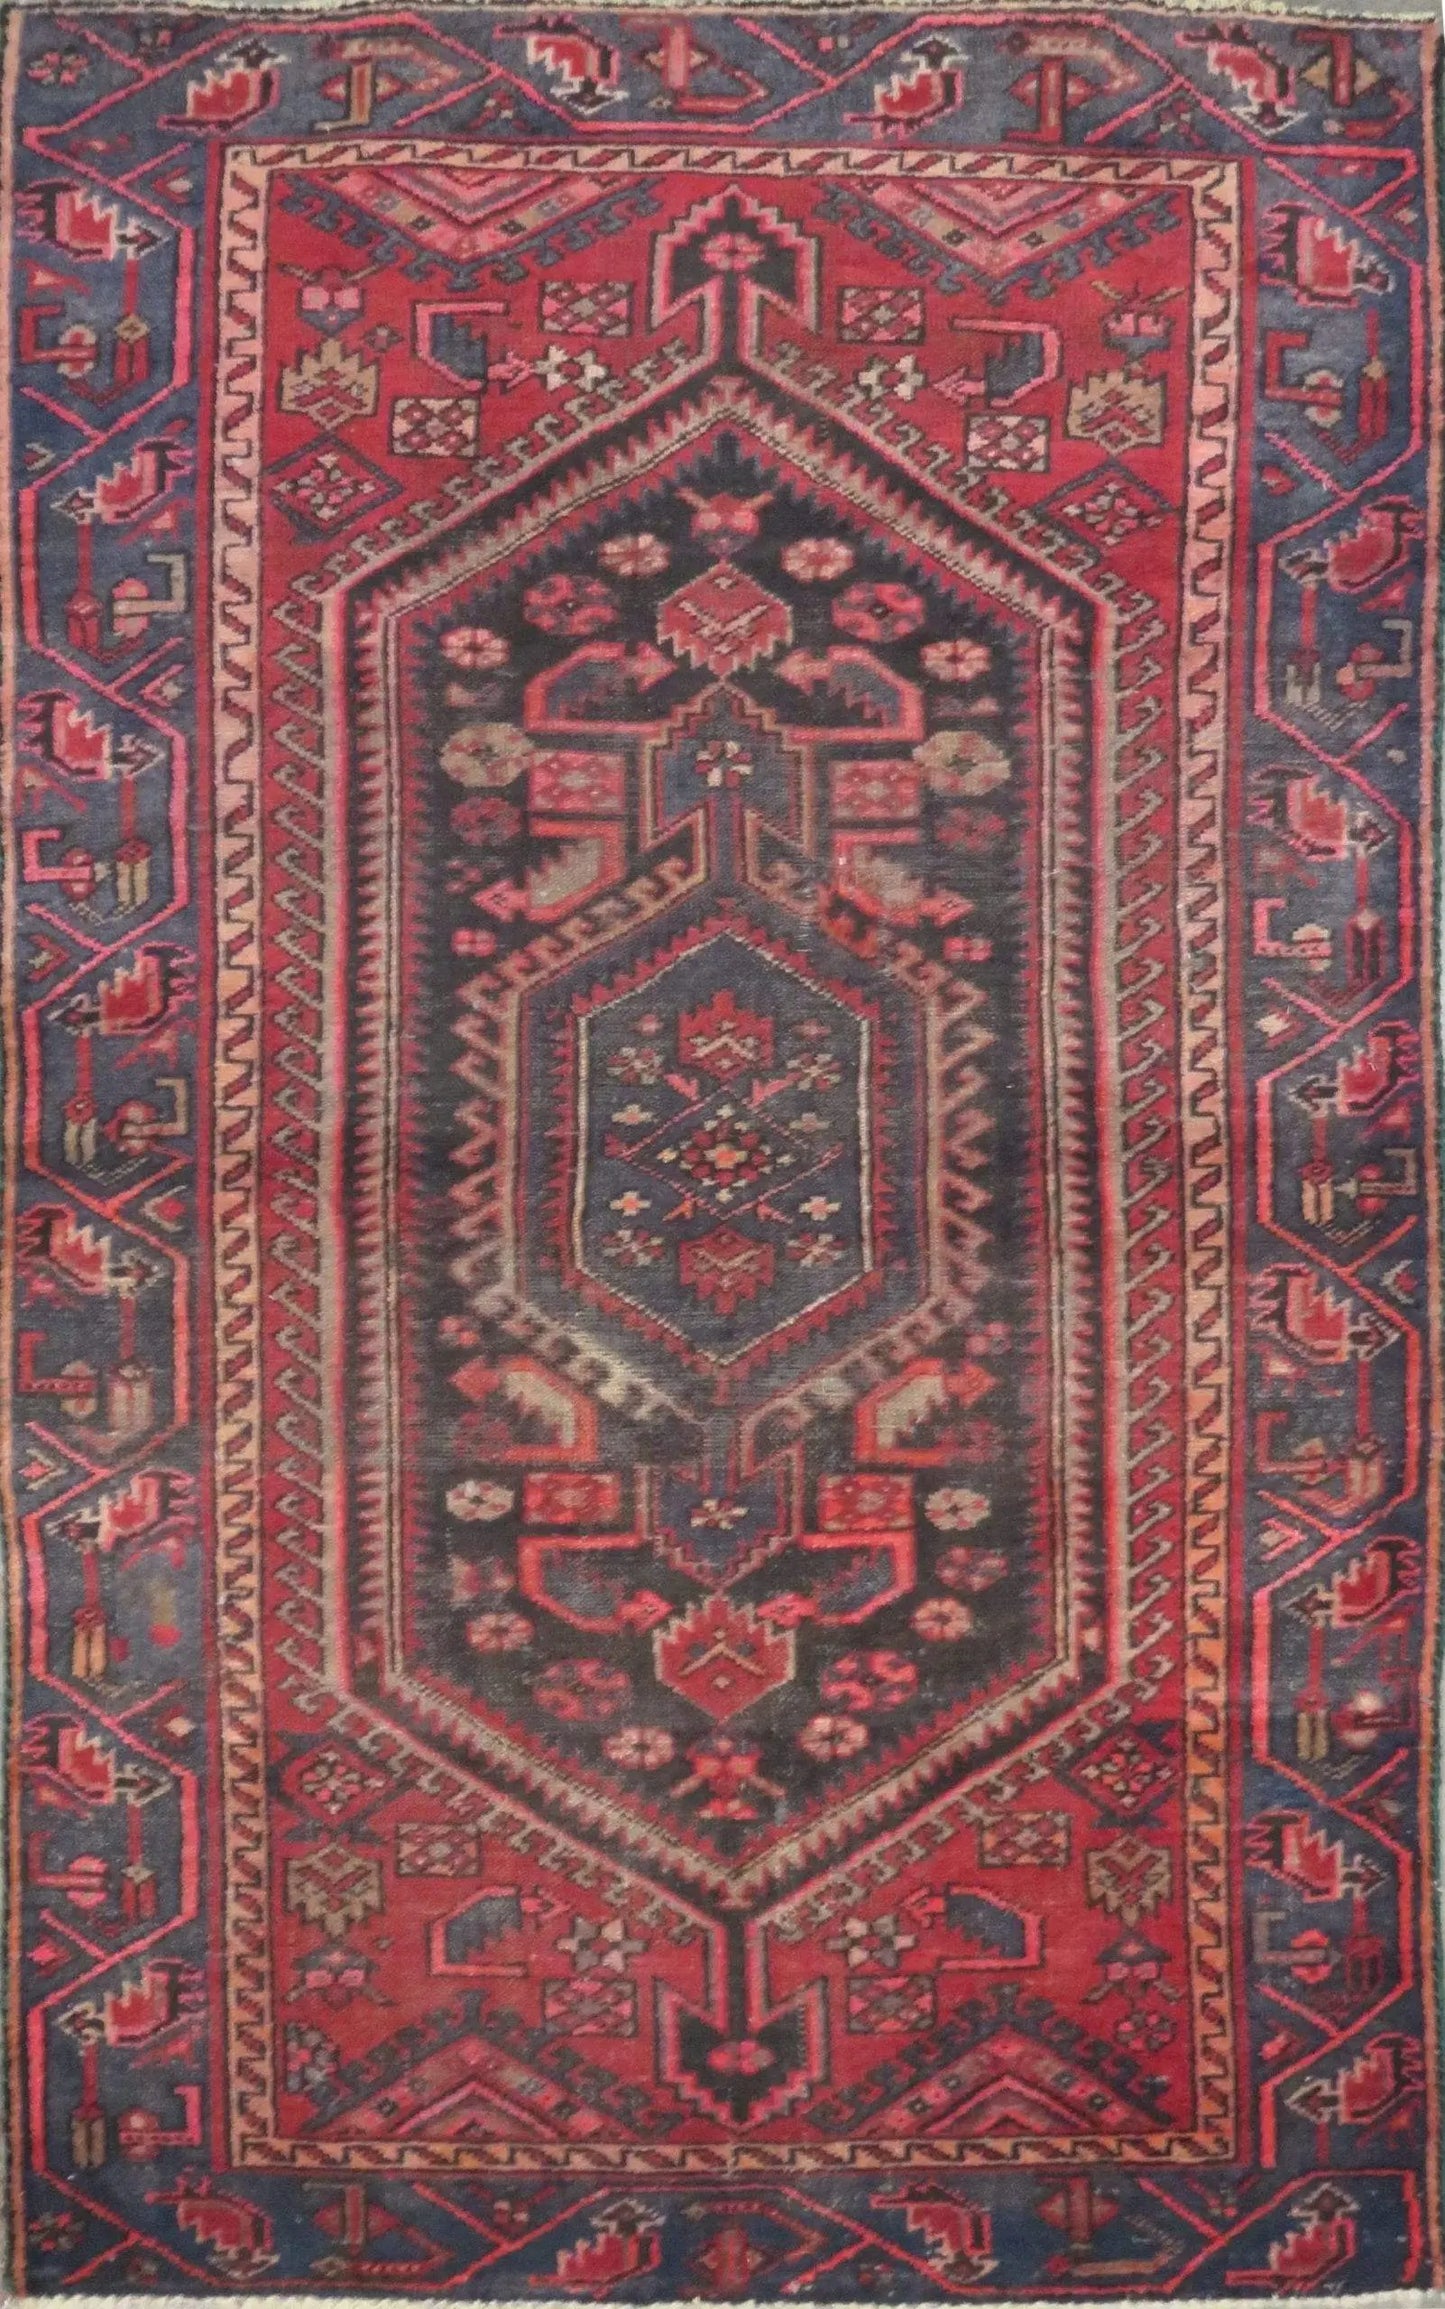 Hand-Knotted Persian Wool Rug _ Luxurious Vintage Design, 6'1" x 3'7", Artisan Crafted